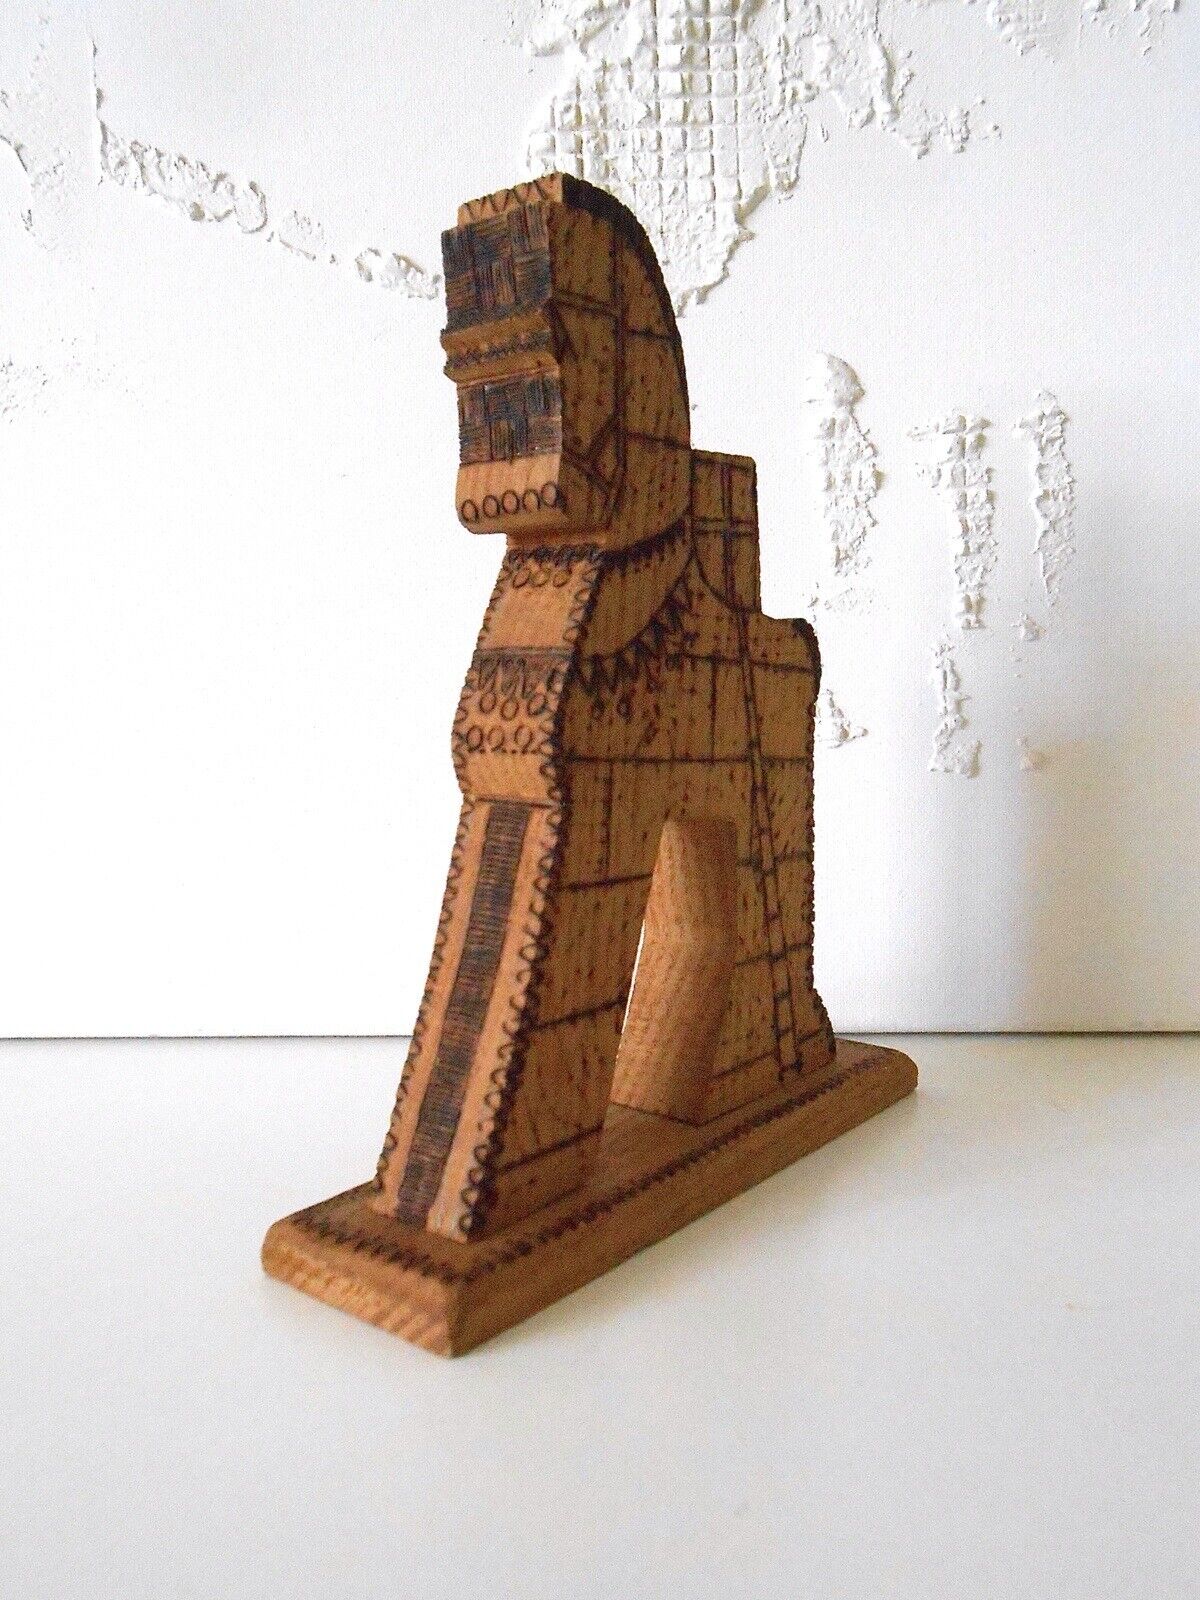 Vintage Wood Trojan Horse Hand Carved Pyrographic Design Figurine Toy Horse Art